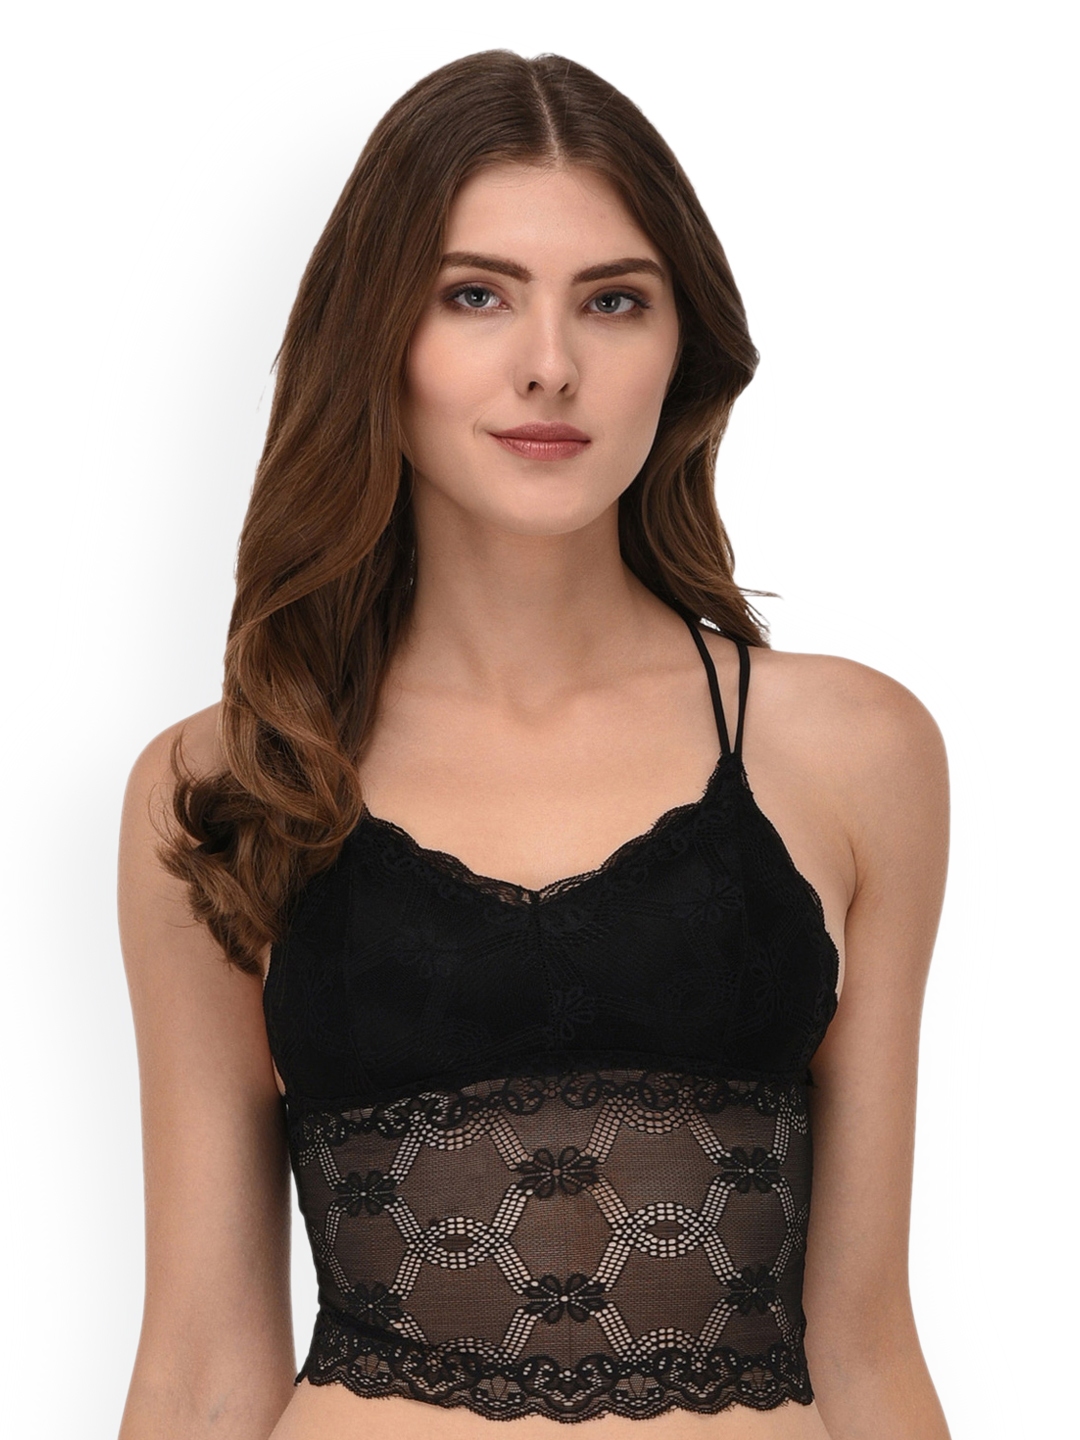 Buy Quttos Black Lace Non Wired Lightly Padded Bralette Bra QT SB